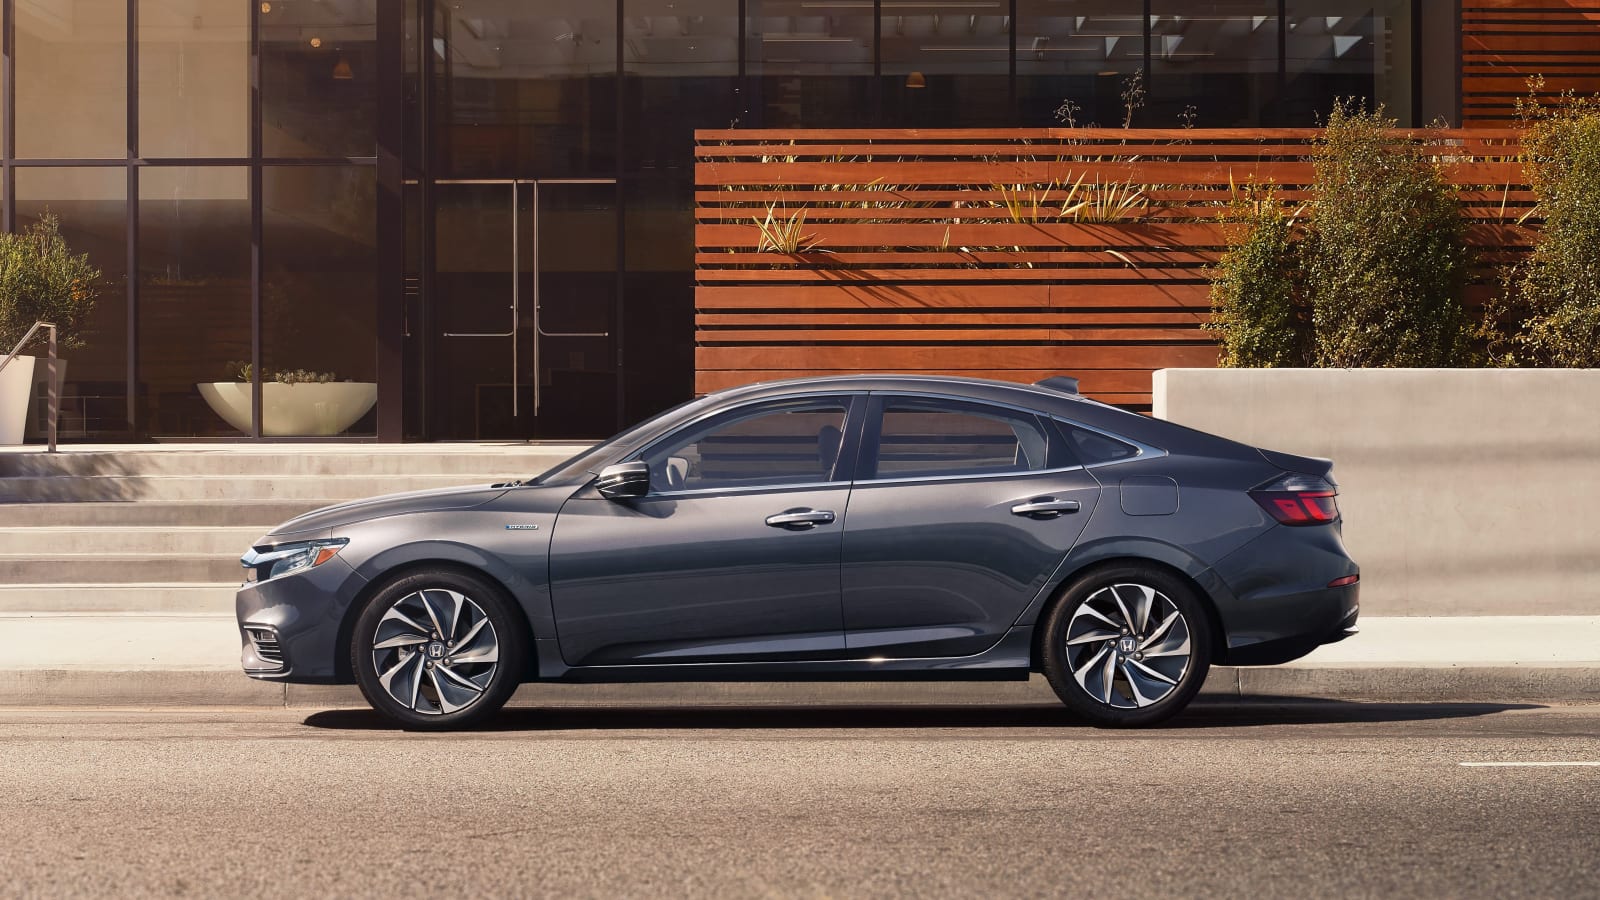 2021 Honda Insight gets new paint color and blind-spot warning system 2 Rice Tire